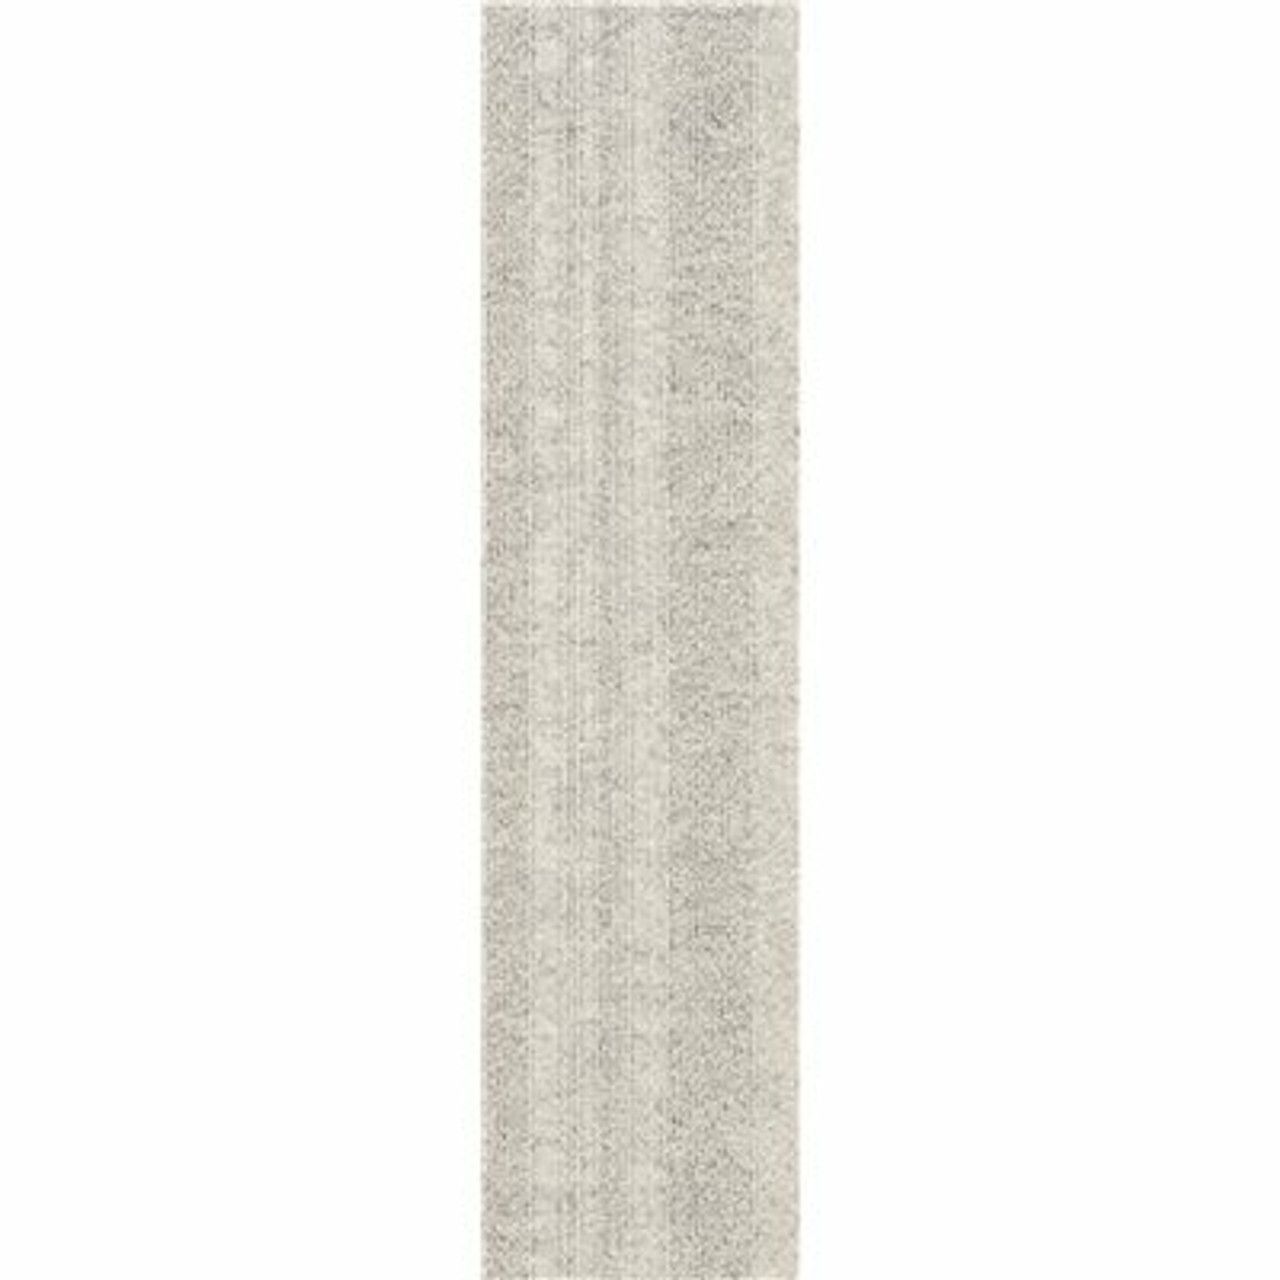 Foss Peel And Stick Oatmeal Barcode Planks 9 In. X 36 In. Commercial/Residential Carpet (16 Tiles/Case)